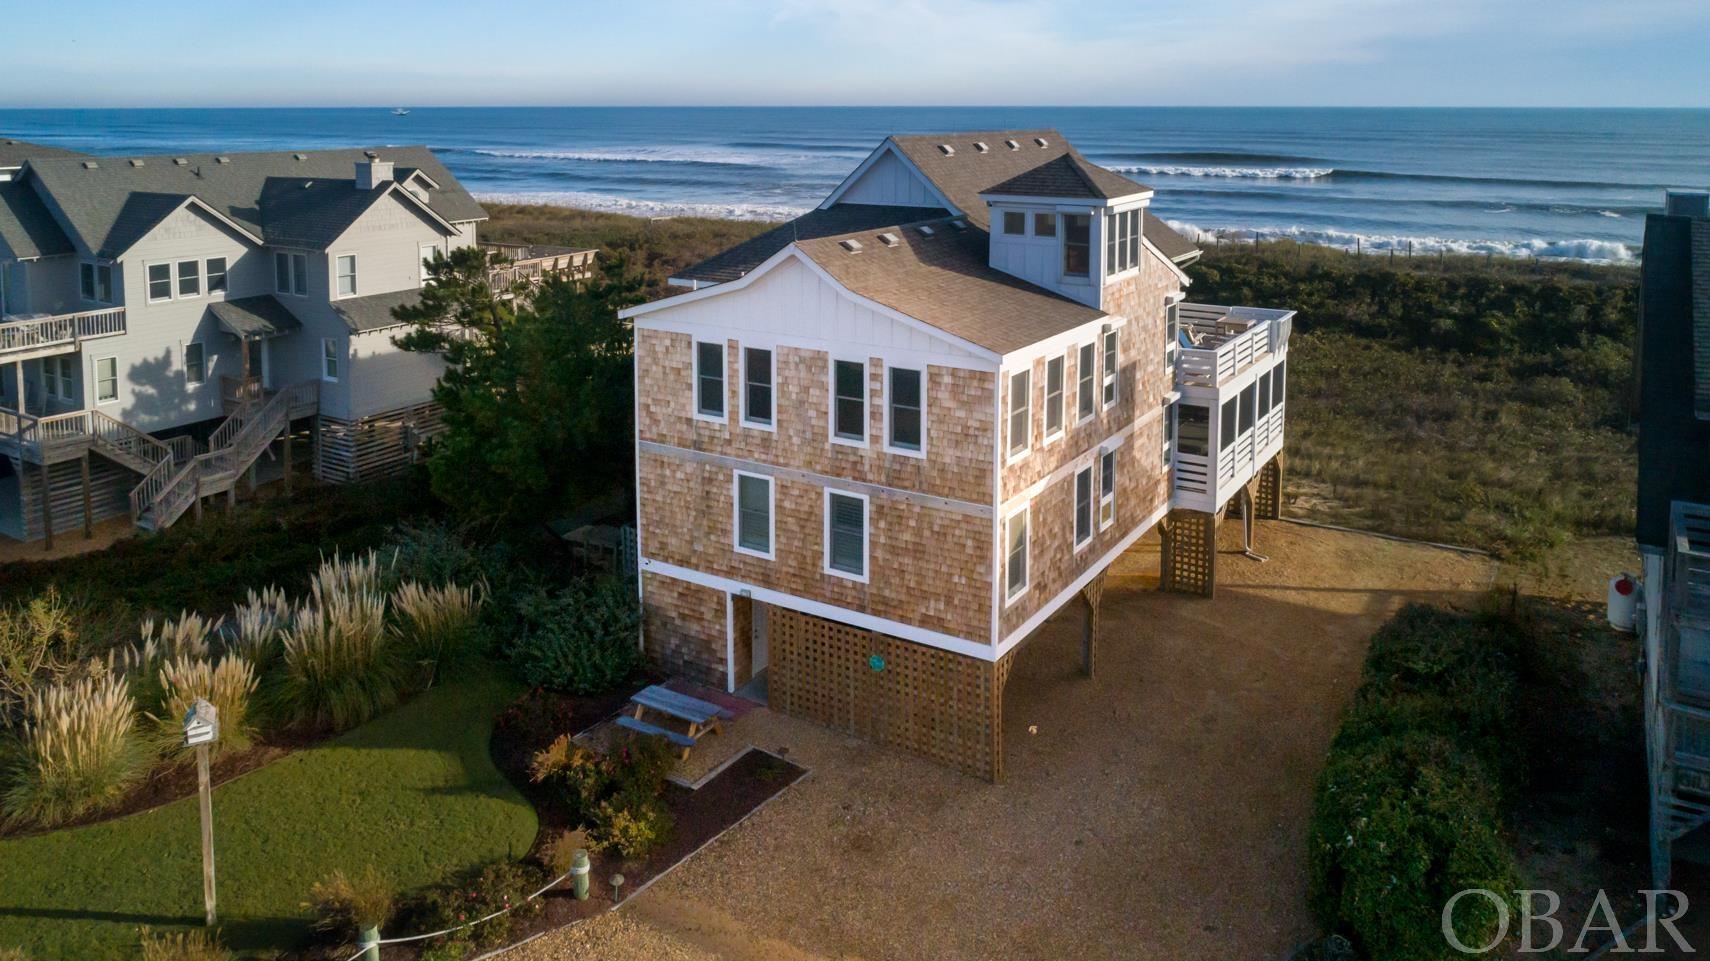 Gorgeous oceanfront home in Sanderling with a walkway to the beach right at your front door! Used only lovingly as a second home, the home is in impeccable shape and boasts new cedar shake siding, all new decking and railings, a new HVAC, and new exterior trim paint in 2021. With 5 master bedrooms, two living areas, a well equipped kitchen, a large den with pool table, gas fireplace and wet bar, a ships watch, and multiple screened in porches and decks overlooking the Atlantic Ocean, this home is truly one of a kind. Also enjoy covered parking under the home with a ChargePoint Home Flex Electric Vehicle Charger plus a one car garage, and plenty of storage. Roof was replaced approx 10 years ago. Projected to do over $141K in Rental Income!